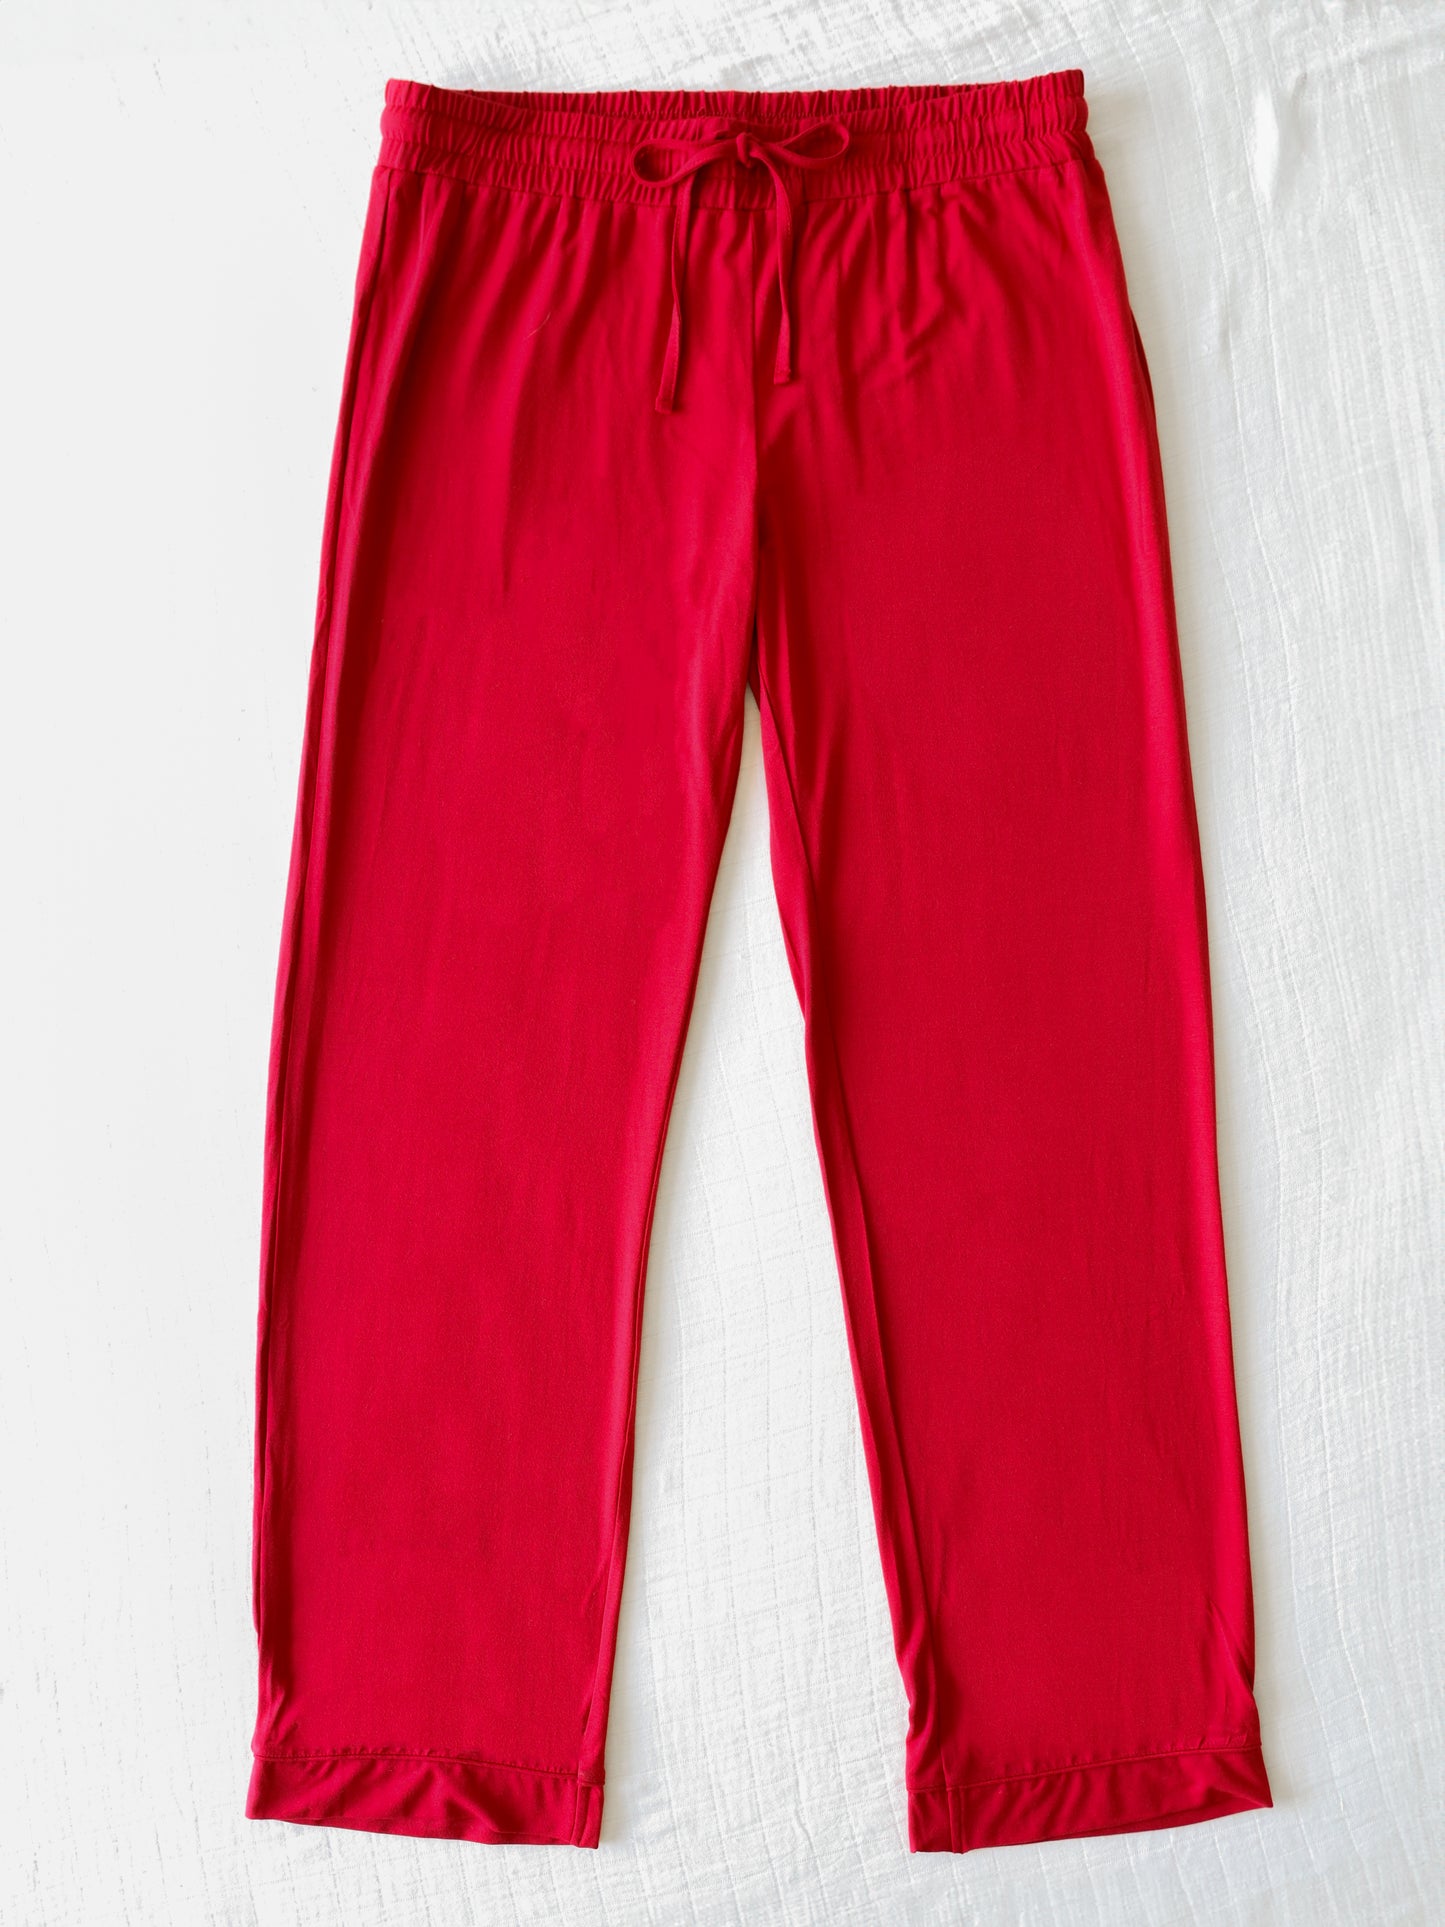 Women's Relaxed Pajama Set - Red My Mind